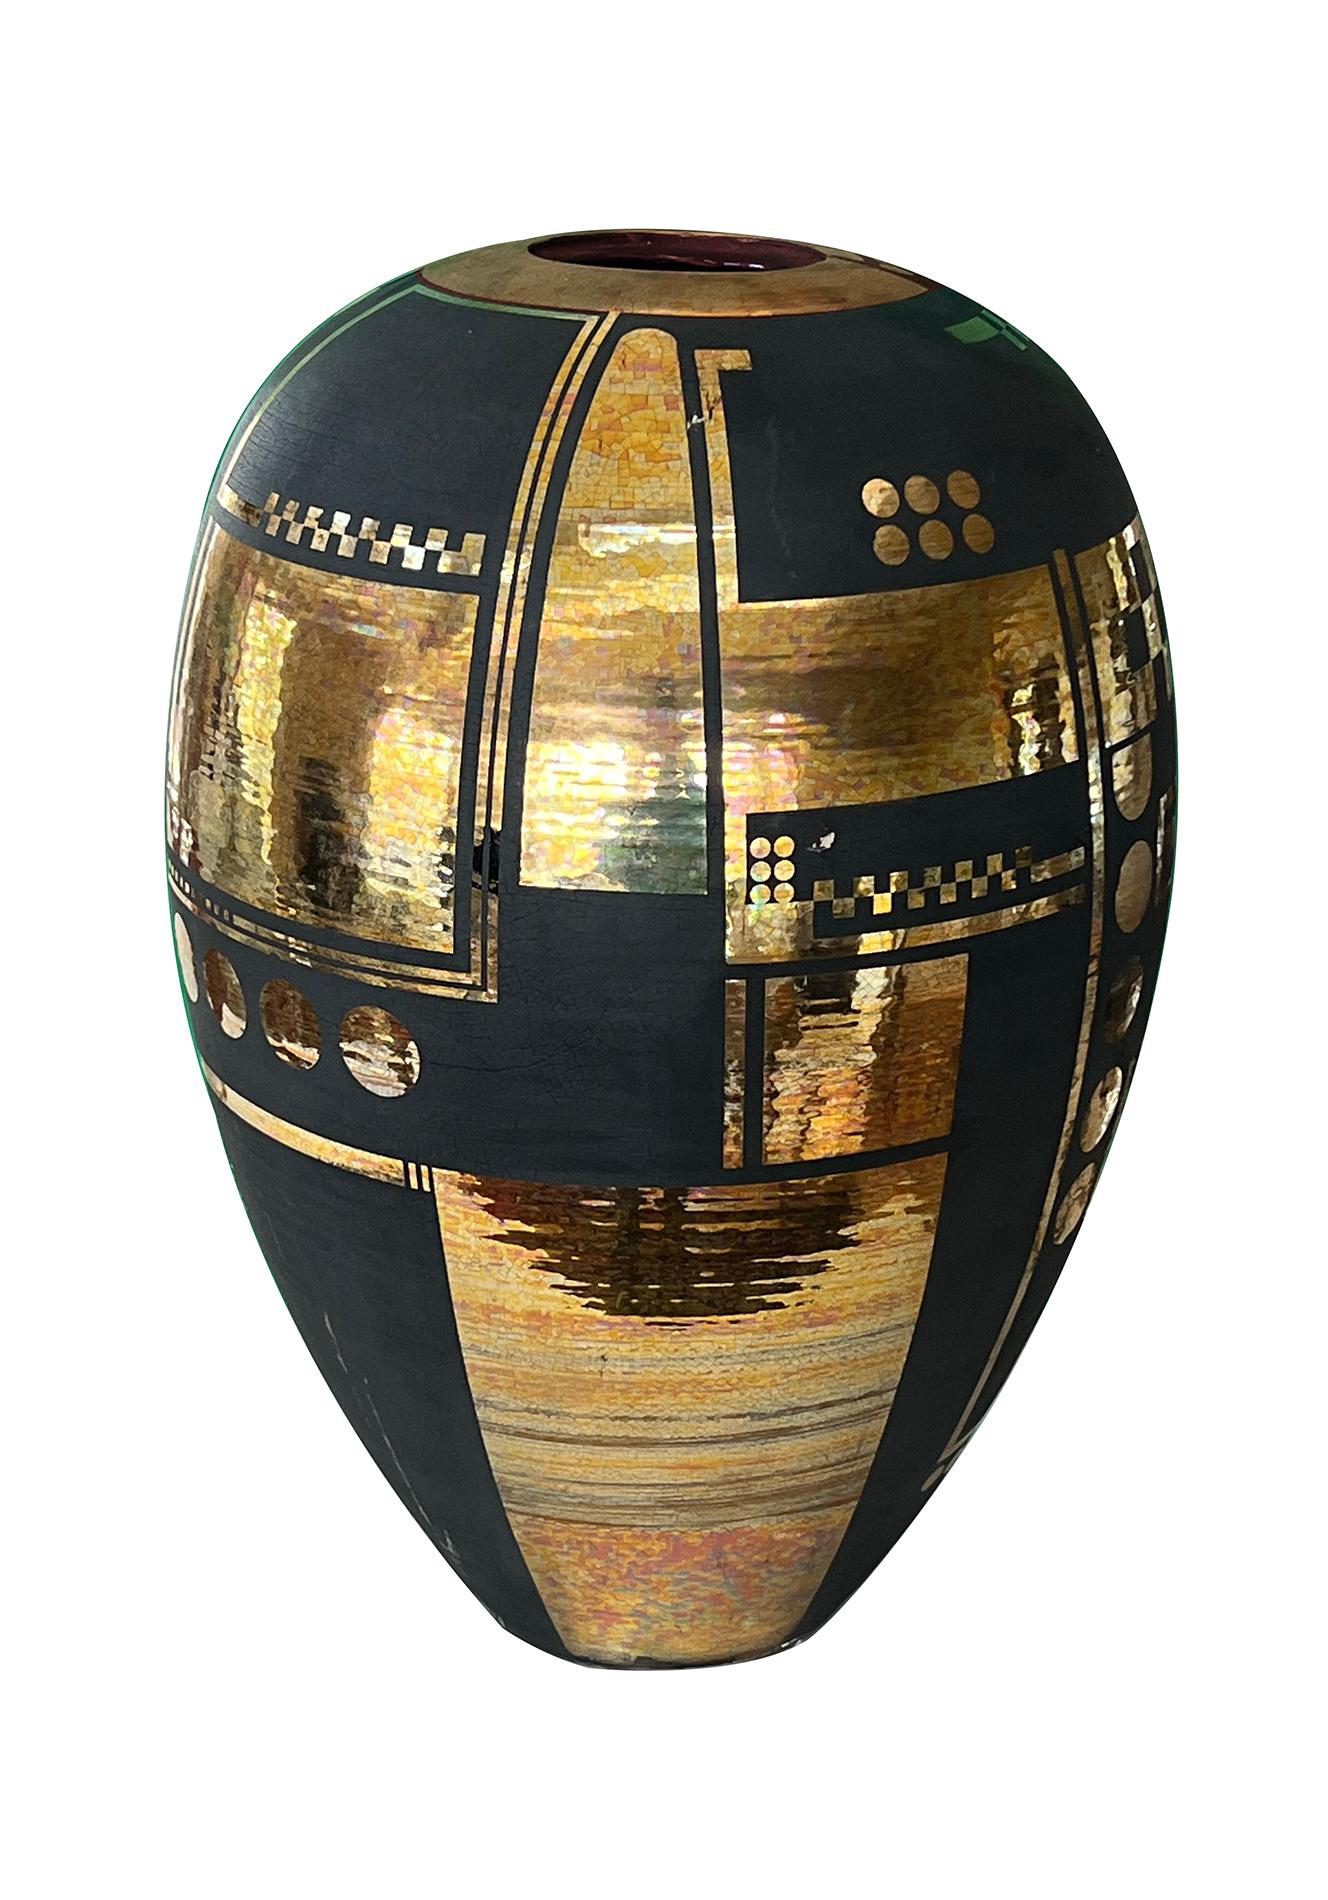 the large ovoid vessel tapering to the base; adorned overall with geometric gilt decoration all on a black matte ground